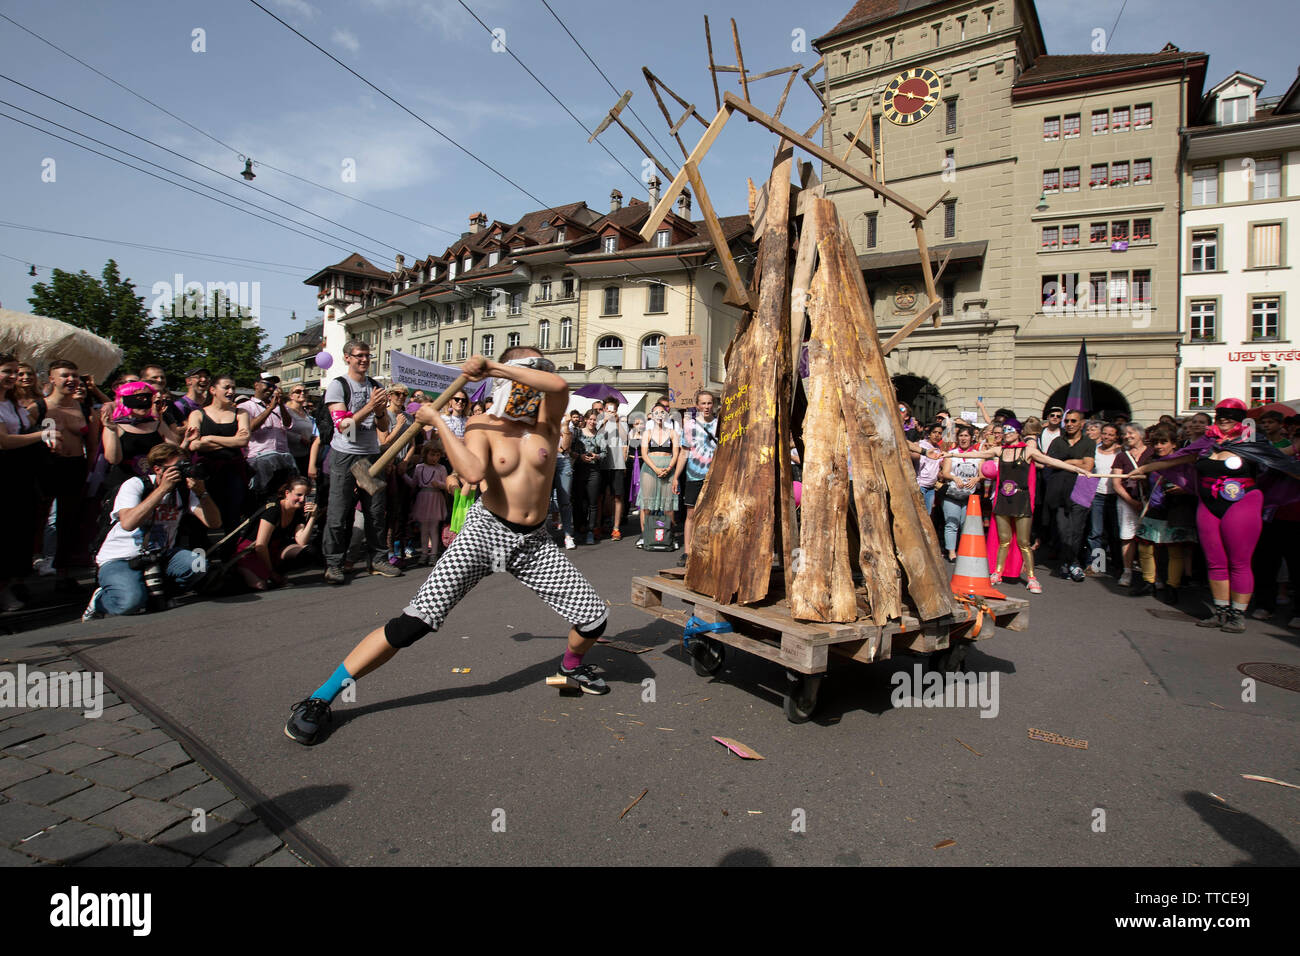 Participants in the Women's Strike in Bern smash an effigy of the Patriarchy using sledgehammers. The Frauenstreik - Womens Strike - brought record numbers of women to the streets in all the big cities in Switzerland. In the capitol Bern, more than 40.000 marched throughout the city to fight for gender equality. Stock Photo